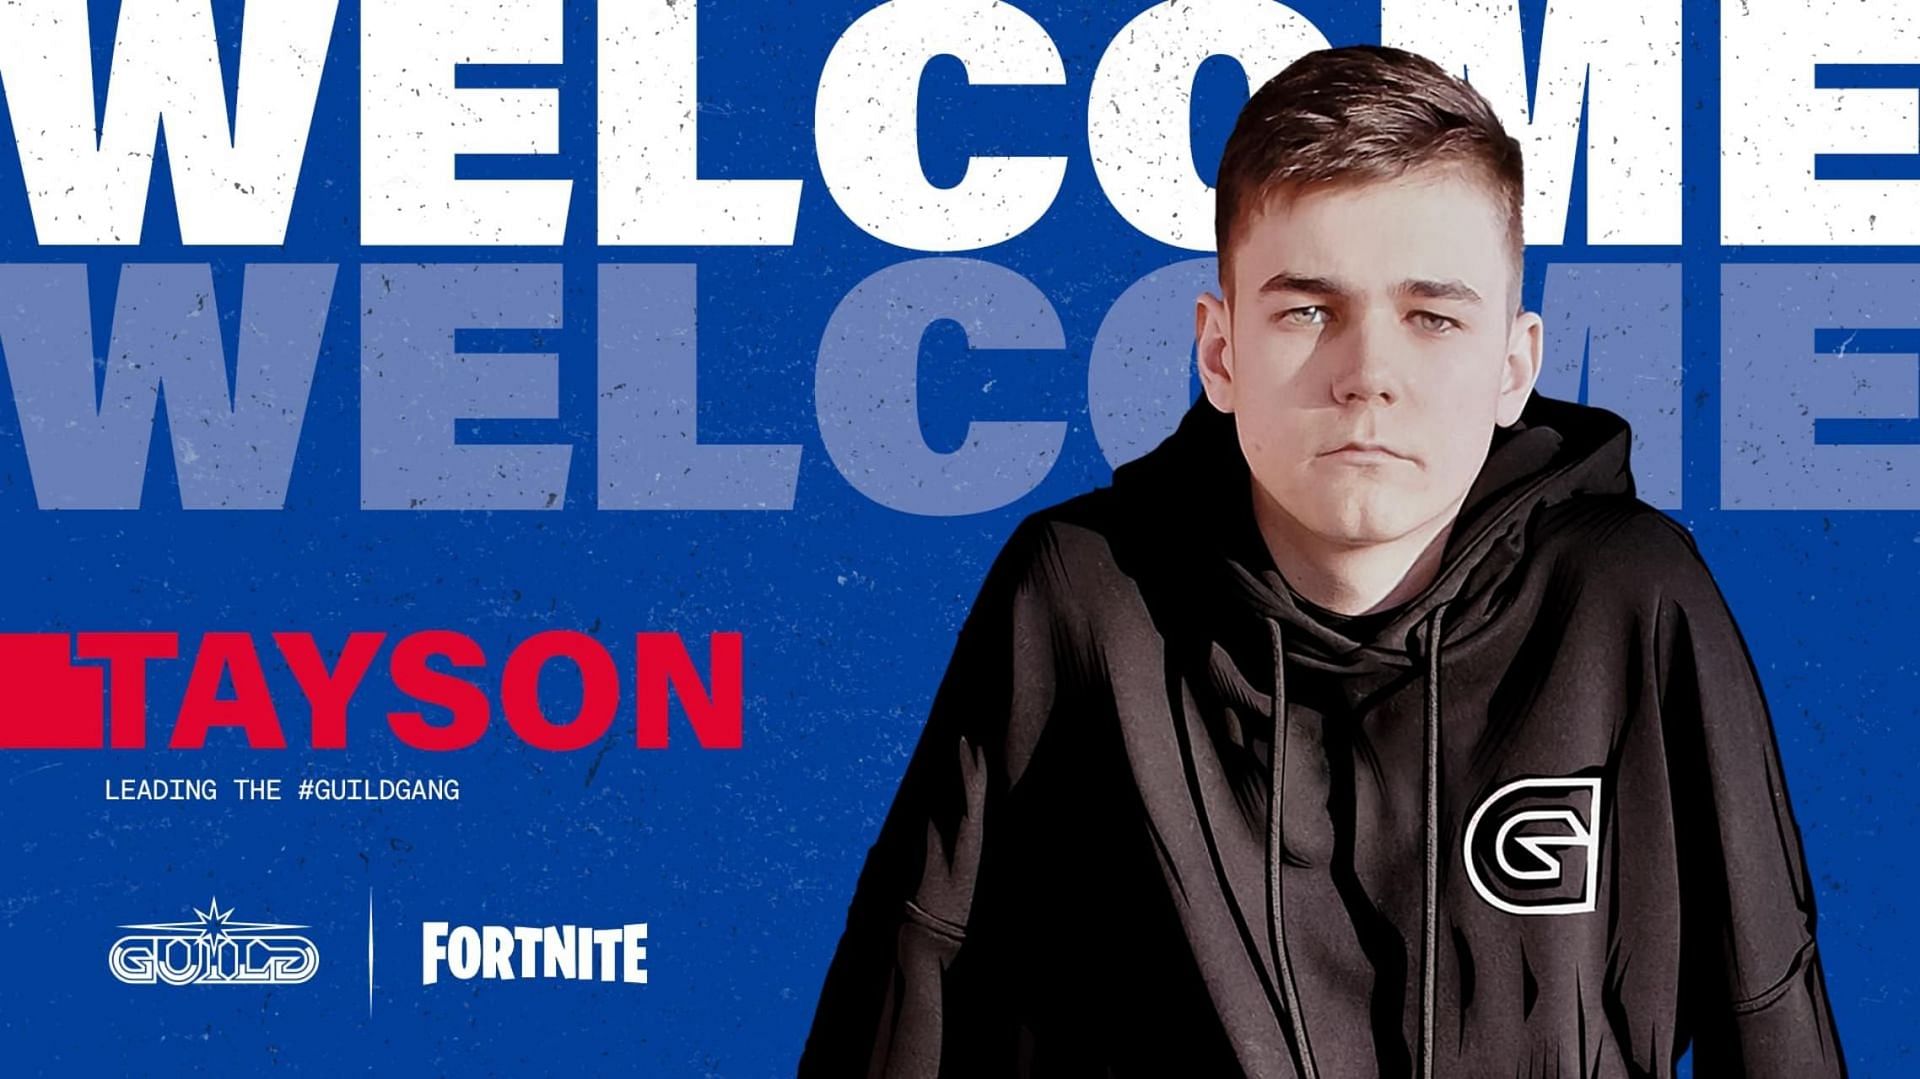 TaySon will most likely win the Fortnite Champion Series in Chapter 3 Season 1 (Image via Guild Esports)